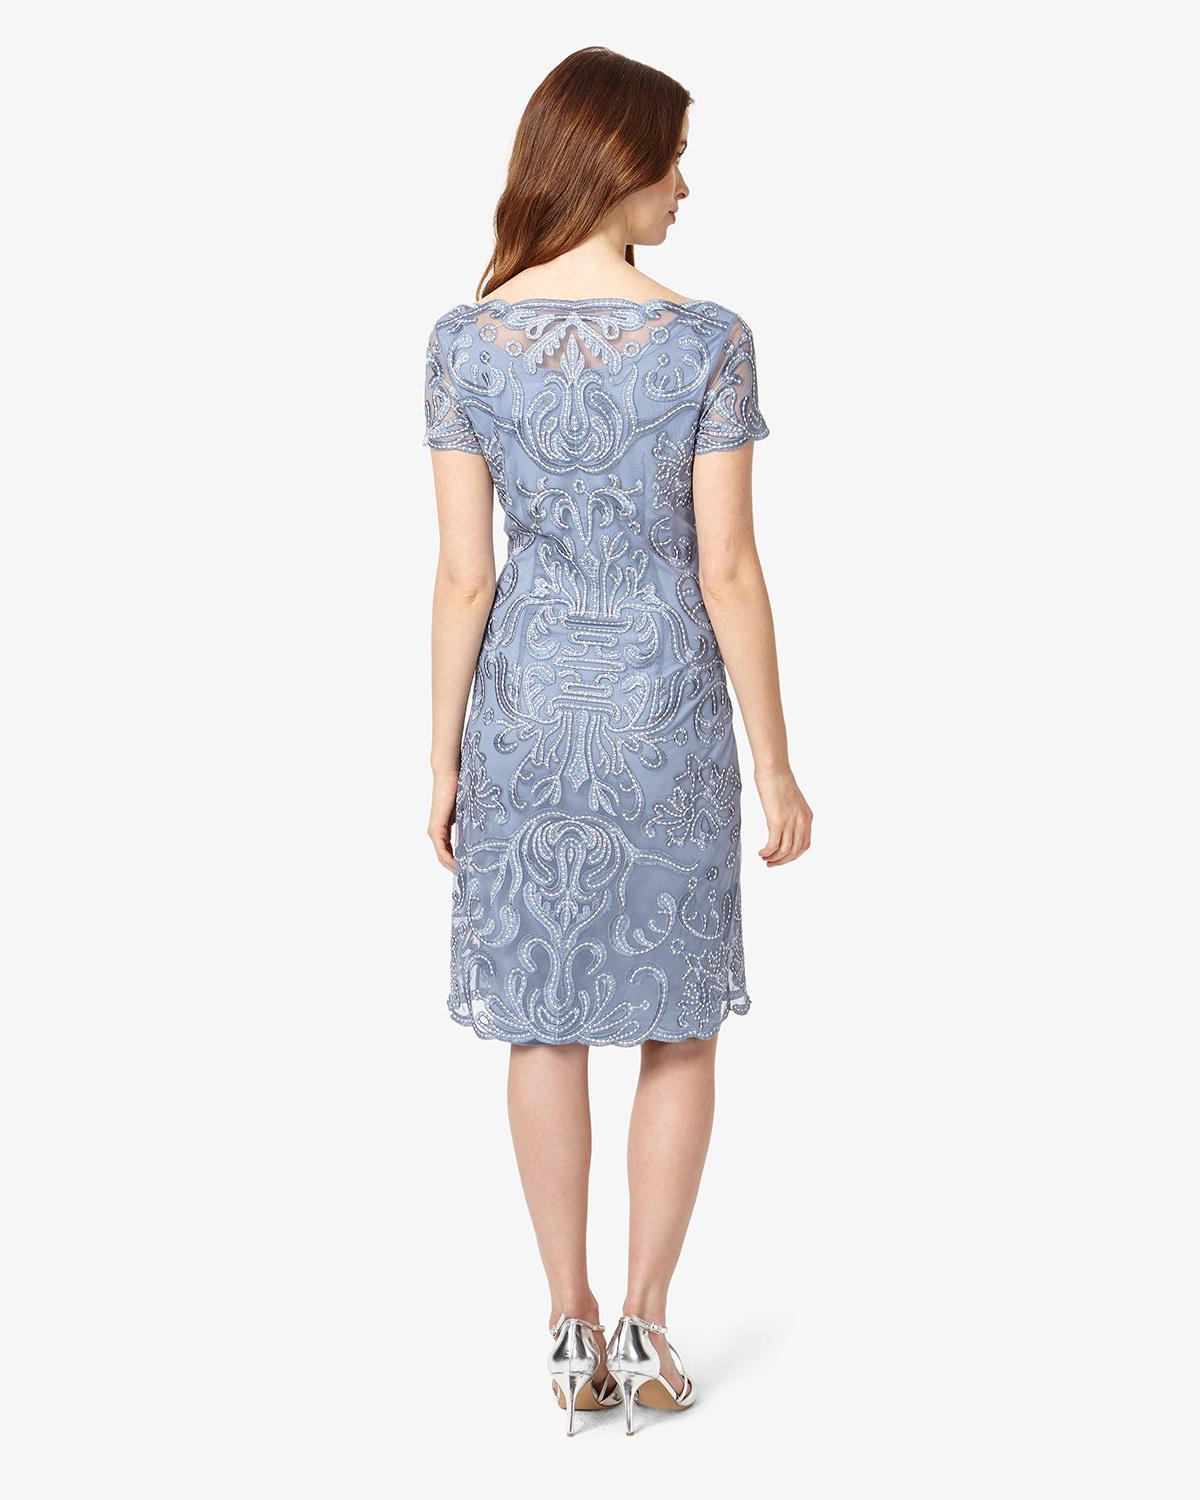 Lyst - Phase Eight Talia Embroidered Dress in Blue